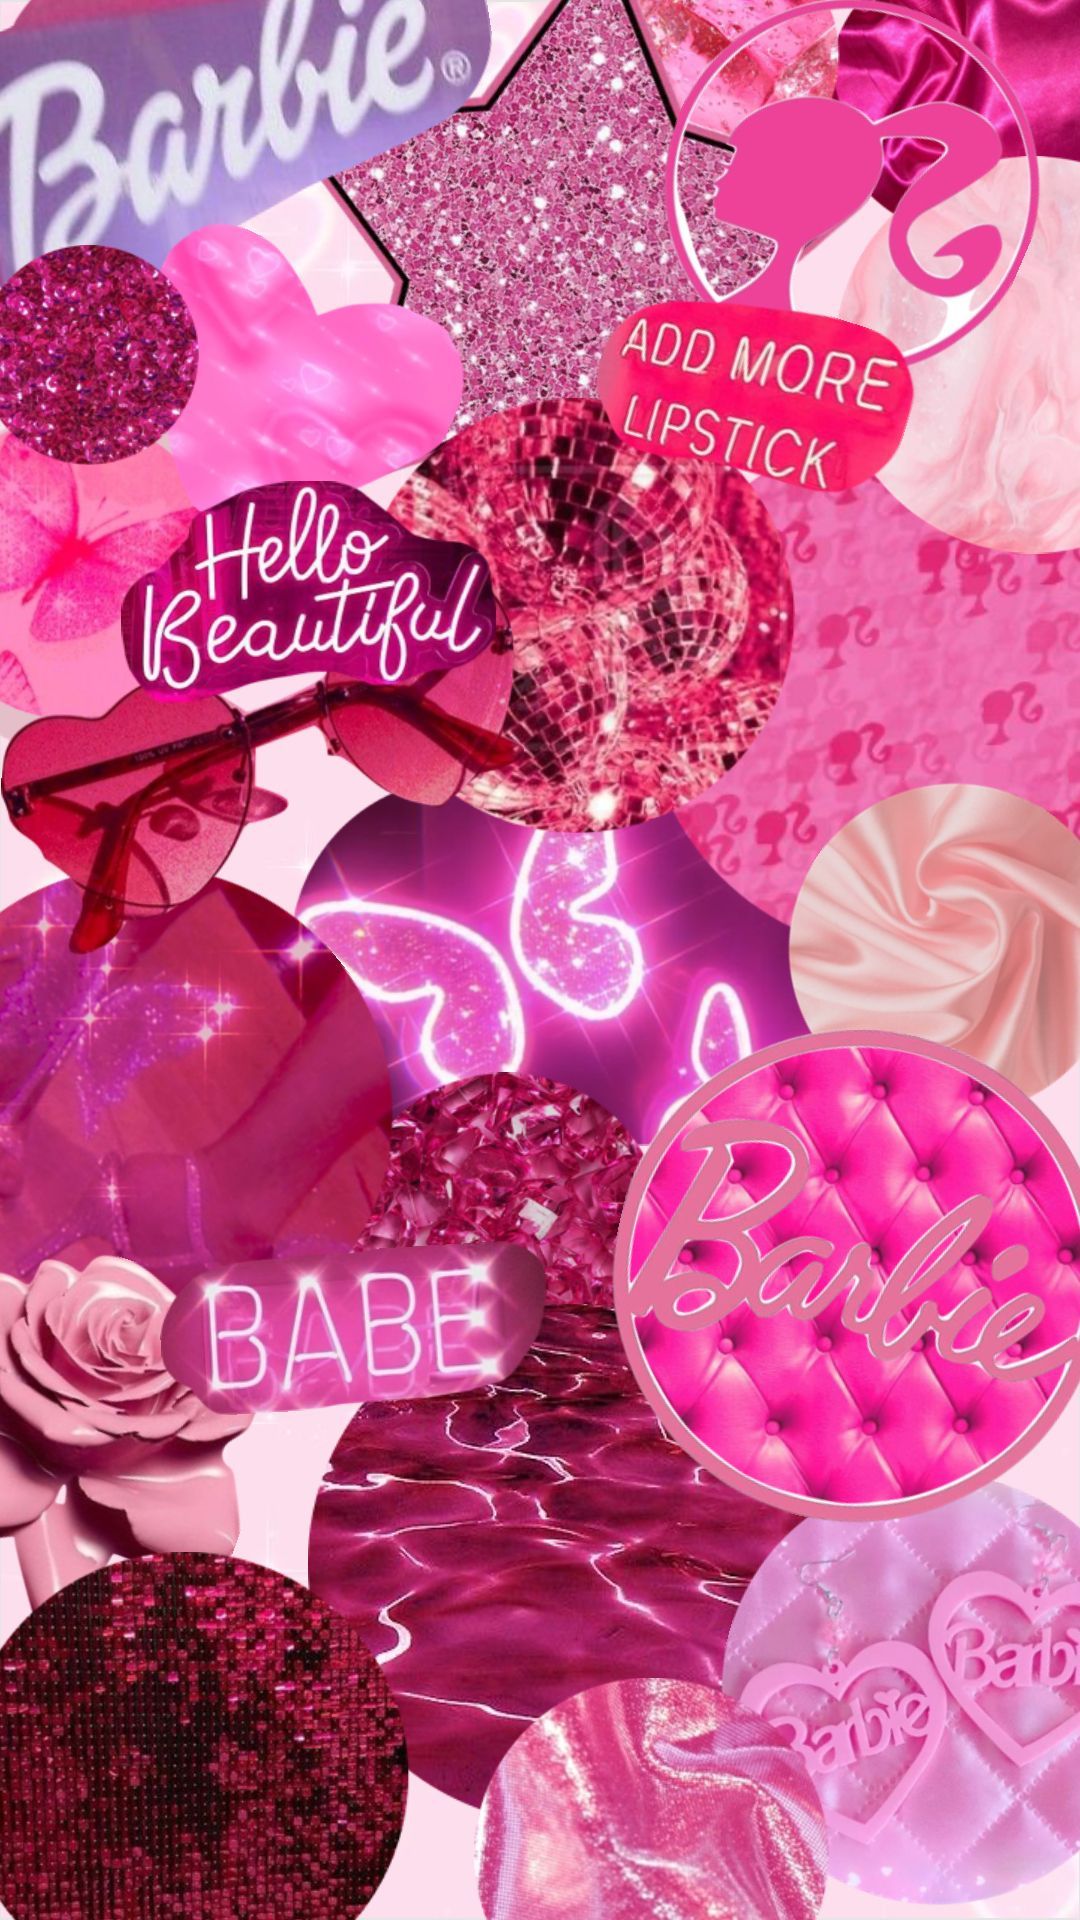 Barbie wallpaper for iPhone and Android! I hope you like it! - Barbie